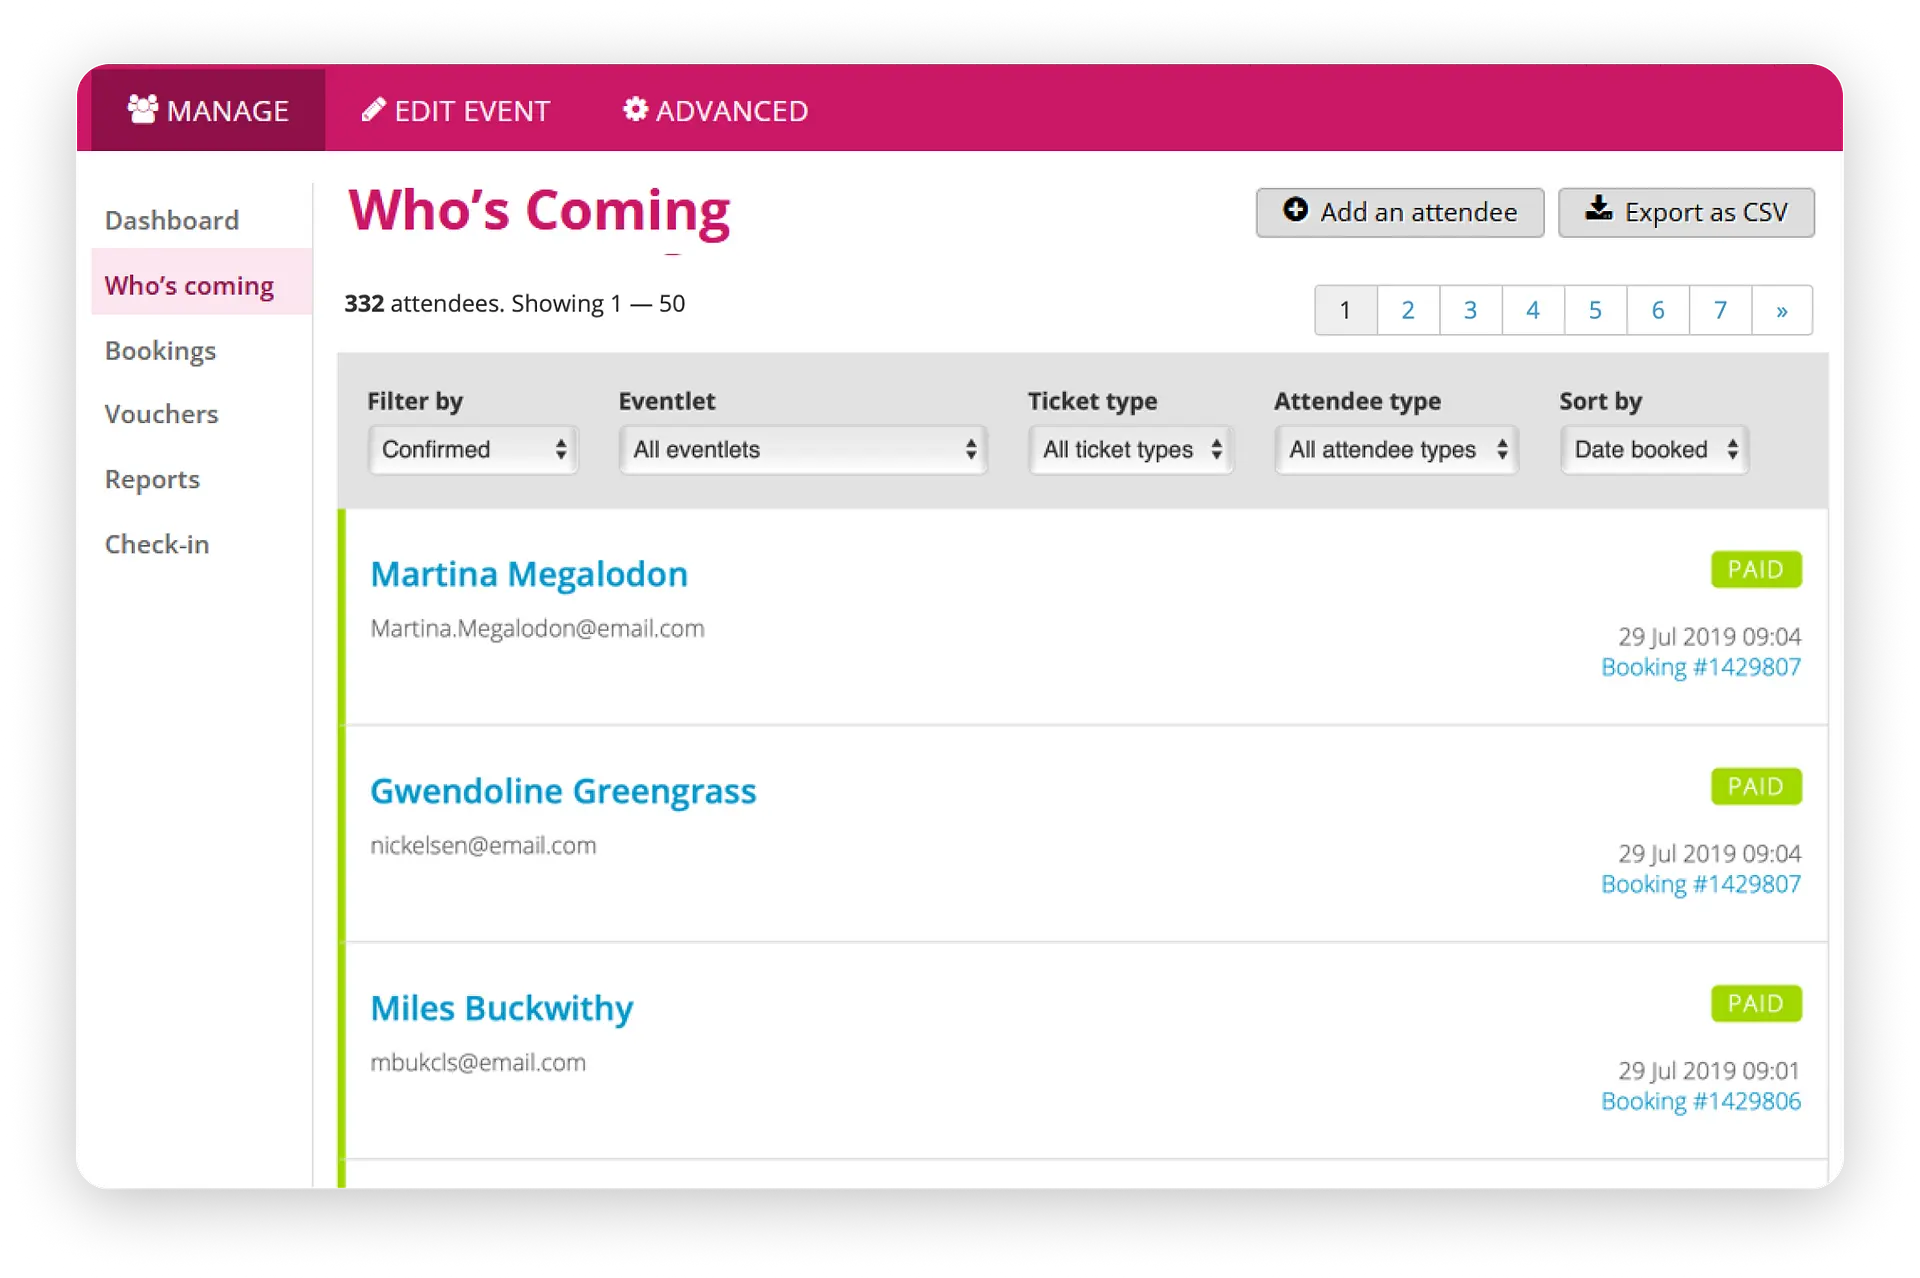 Screenshot of our “Who’s coming” interface